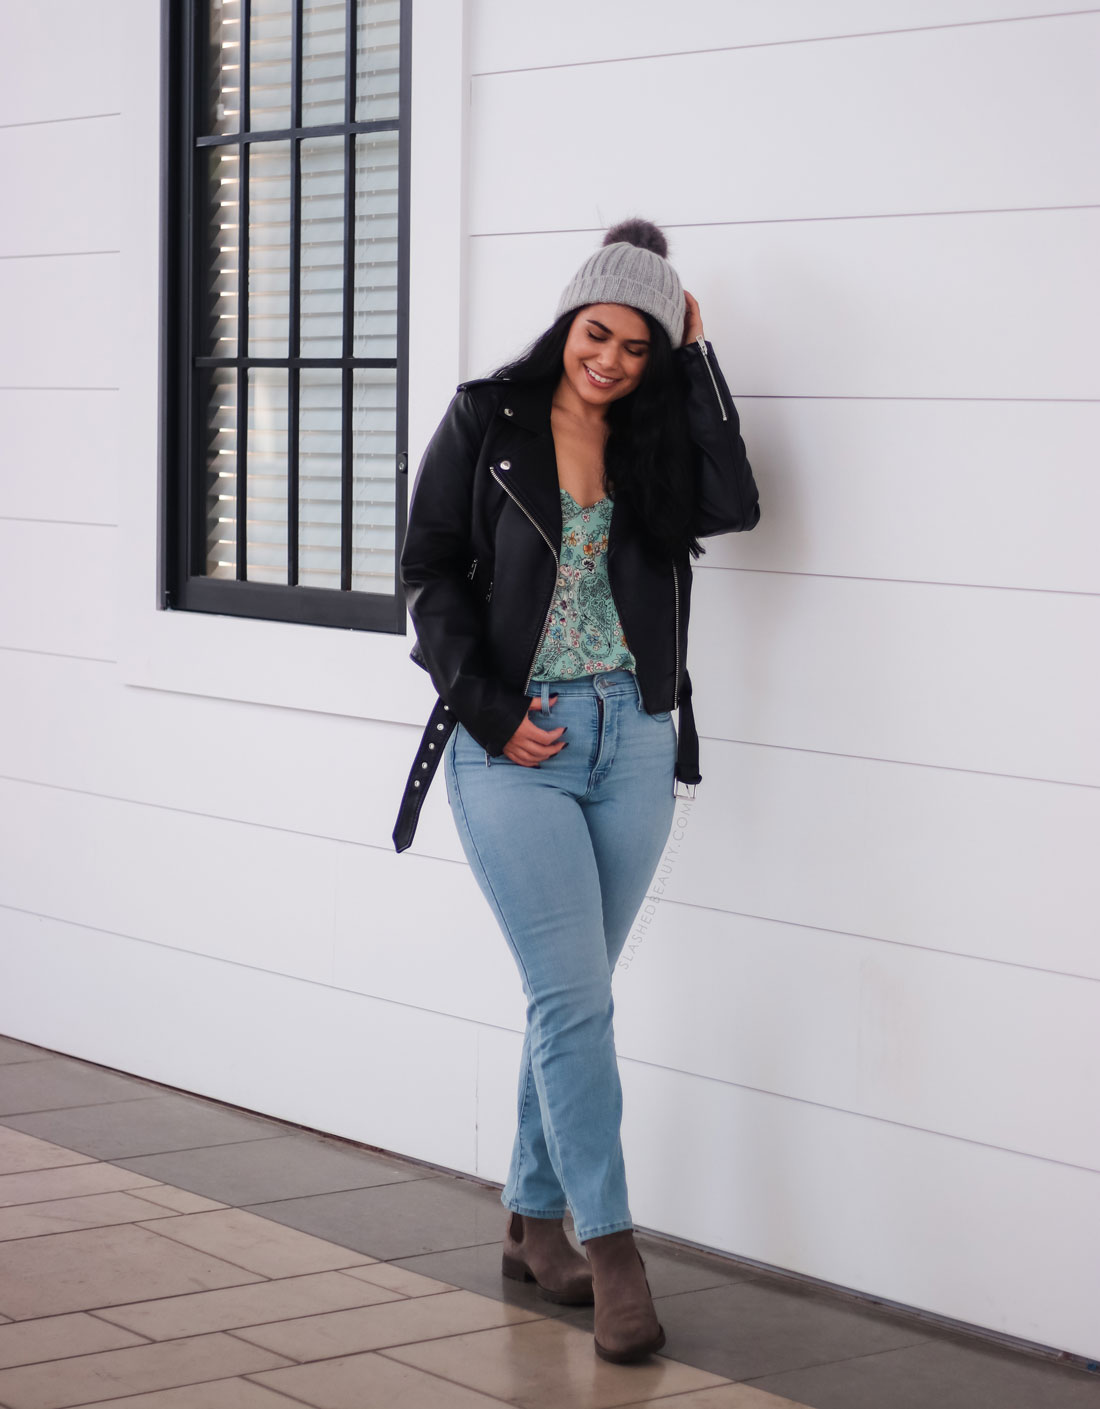 Leather jacket outfit for winter: bright top, light wash jeans, beanie and boots. | Create More Outfits with 3 Outerwear Essentials | Slashed Beauty